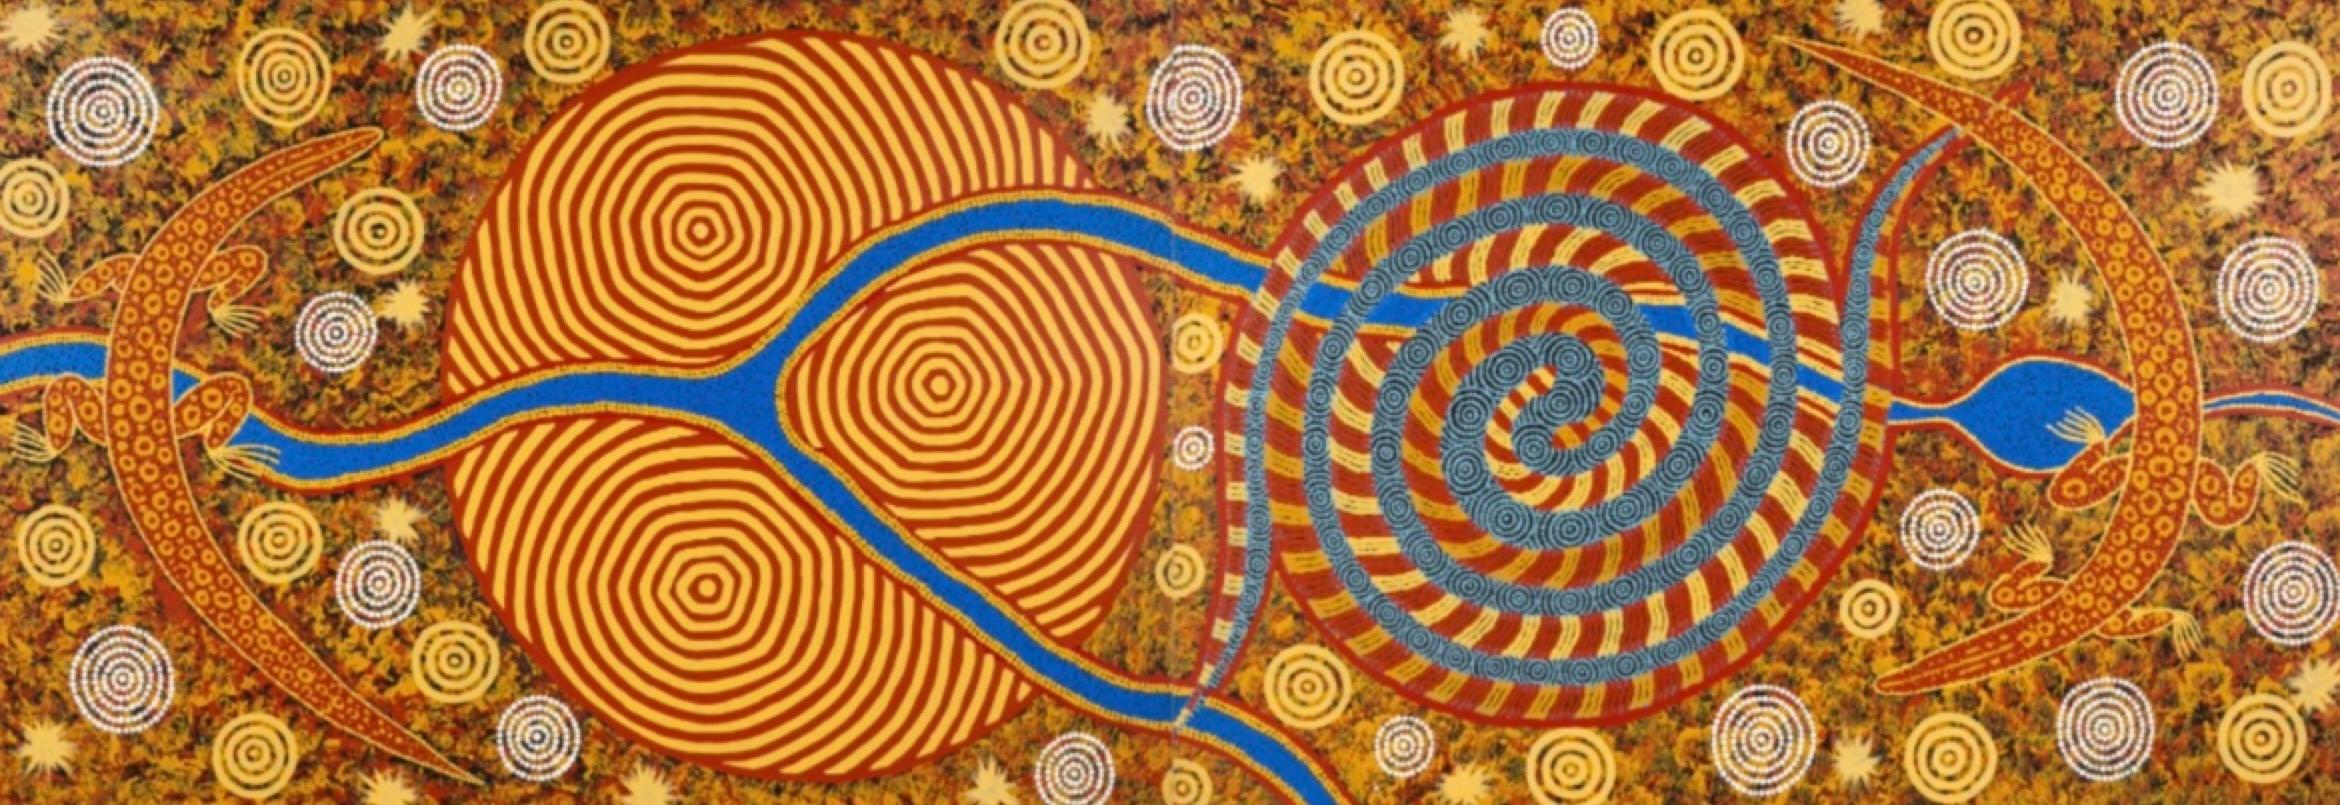 This very large and colorful Aboriginal painting is a diptych (2 canvases) and can be displayed horizontally or vertically.

This painting depicts the creation of the Lander River system. It includes elements and stories from the artist's family